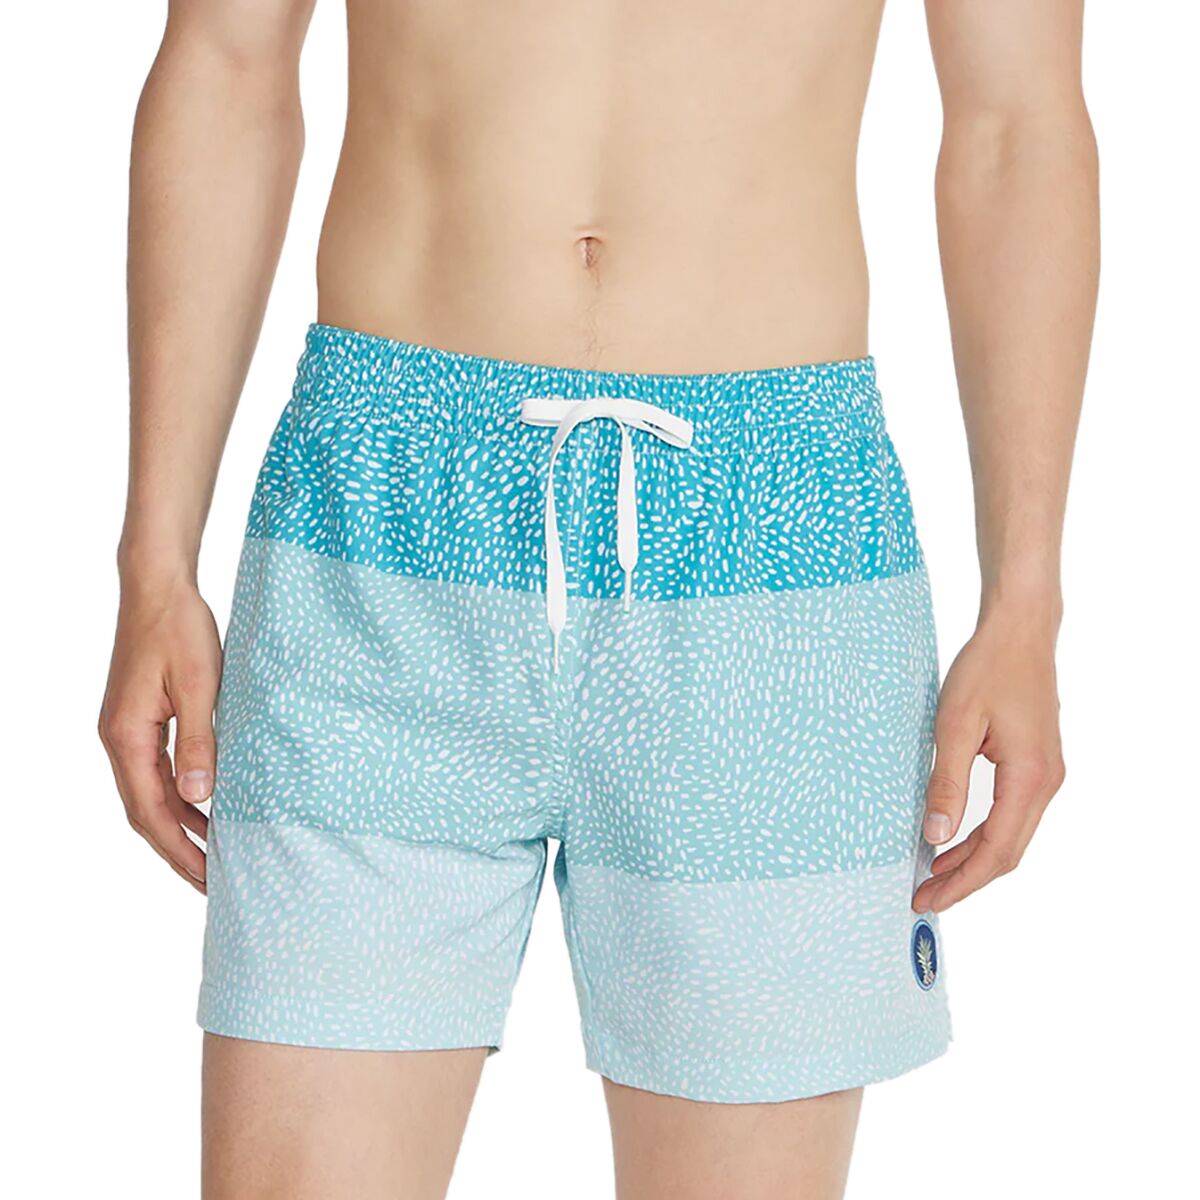 Chubbies The Whale Sharks 5.5in (Stretch + Liner) Swim Trunk - Men's